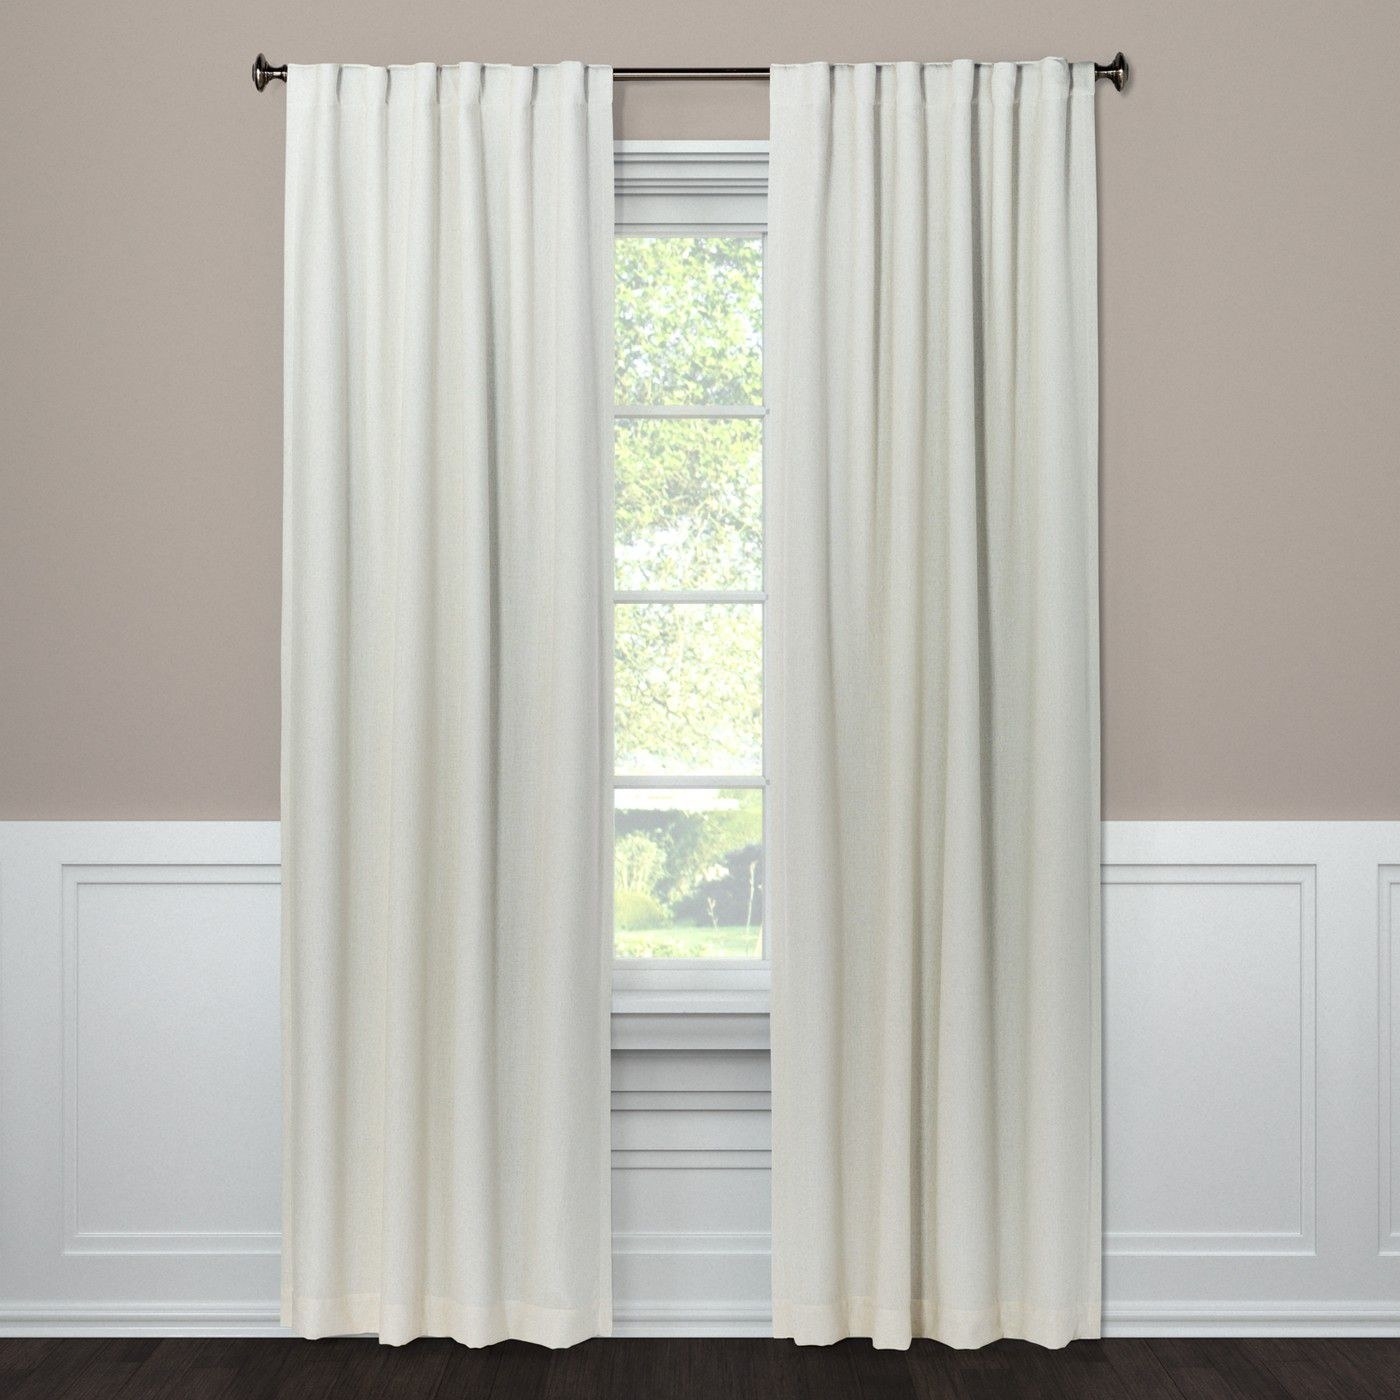 White blackout curtains in a home